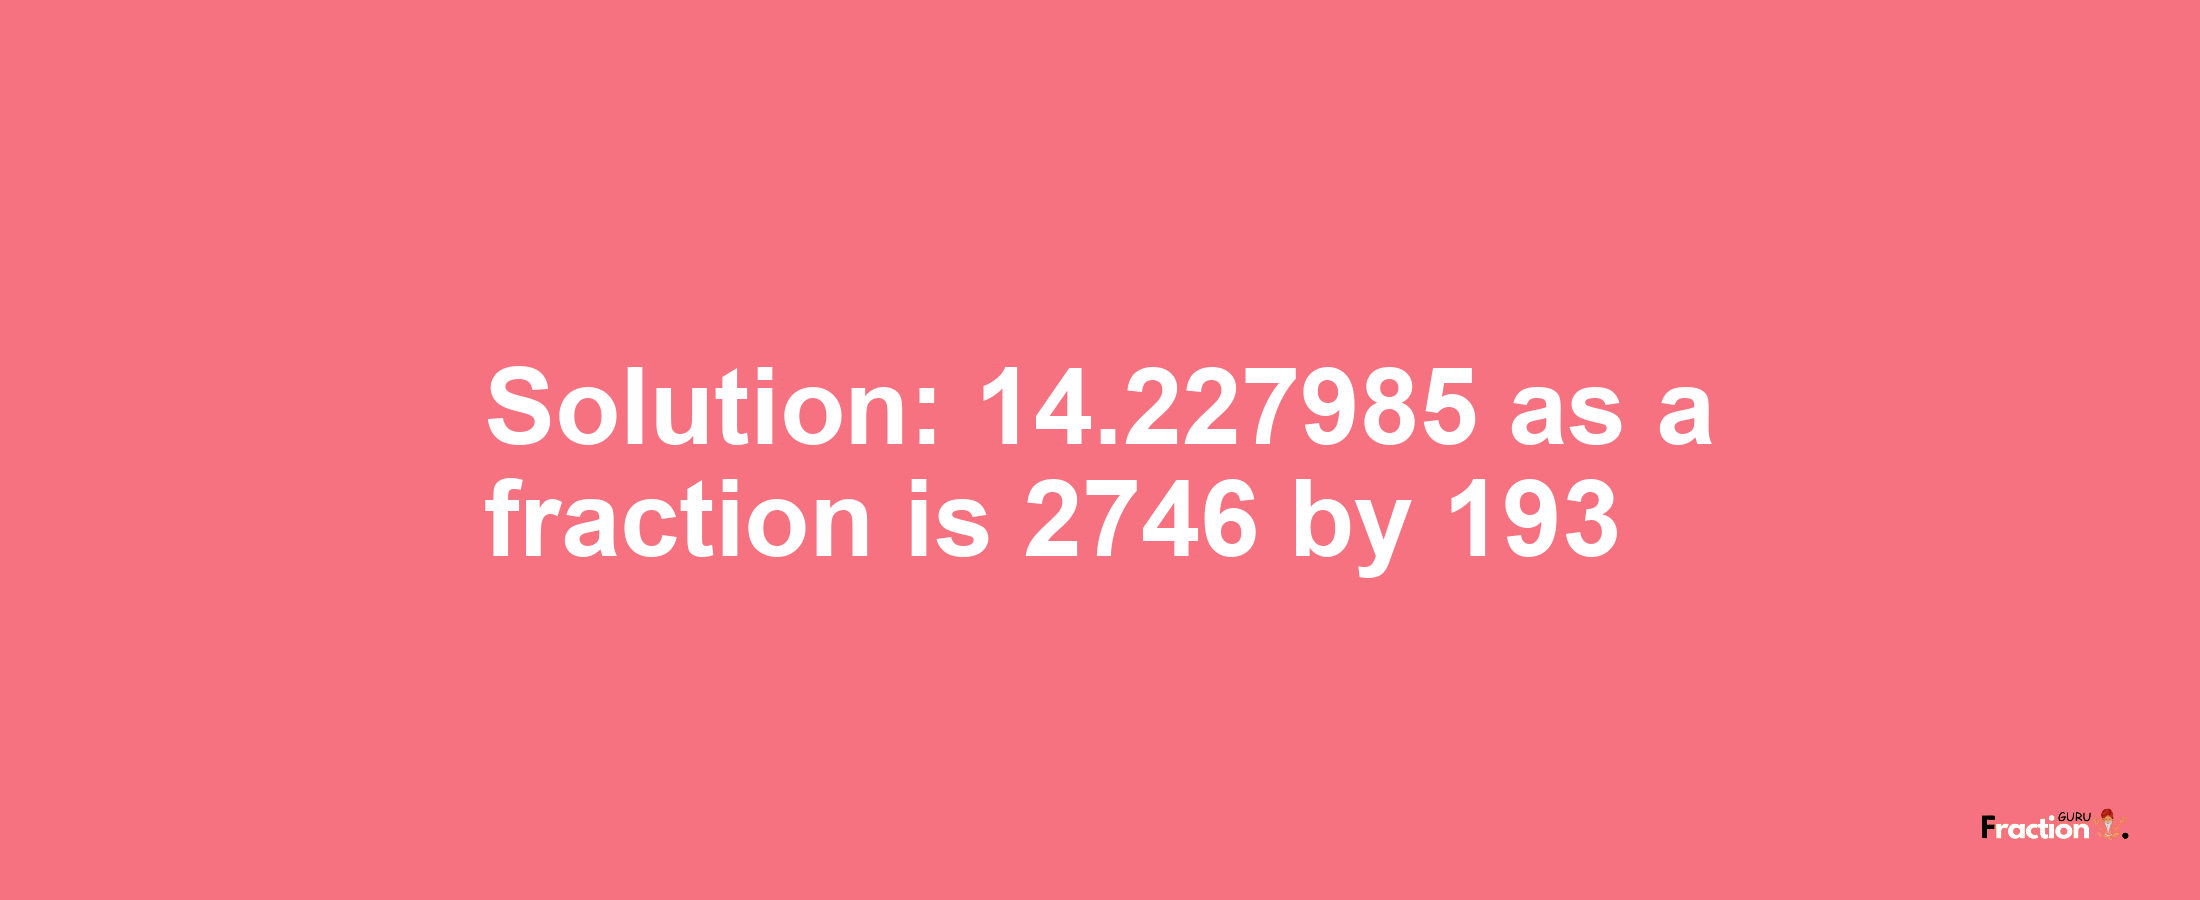 Solution:14.227985 as a fraction is 2746/193